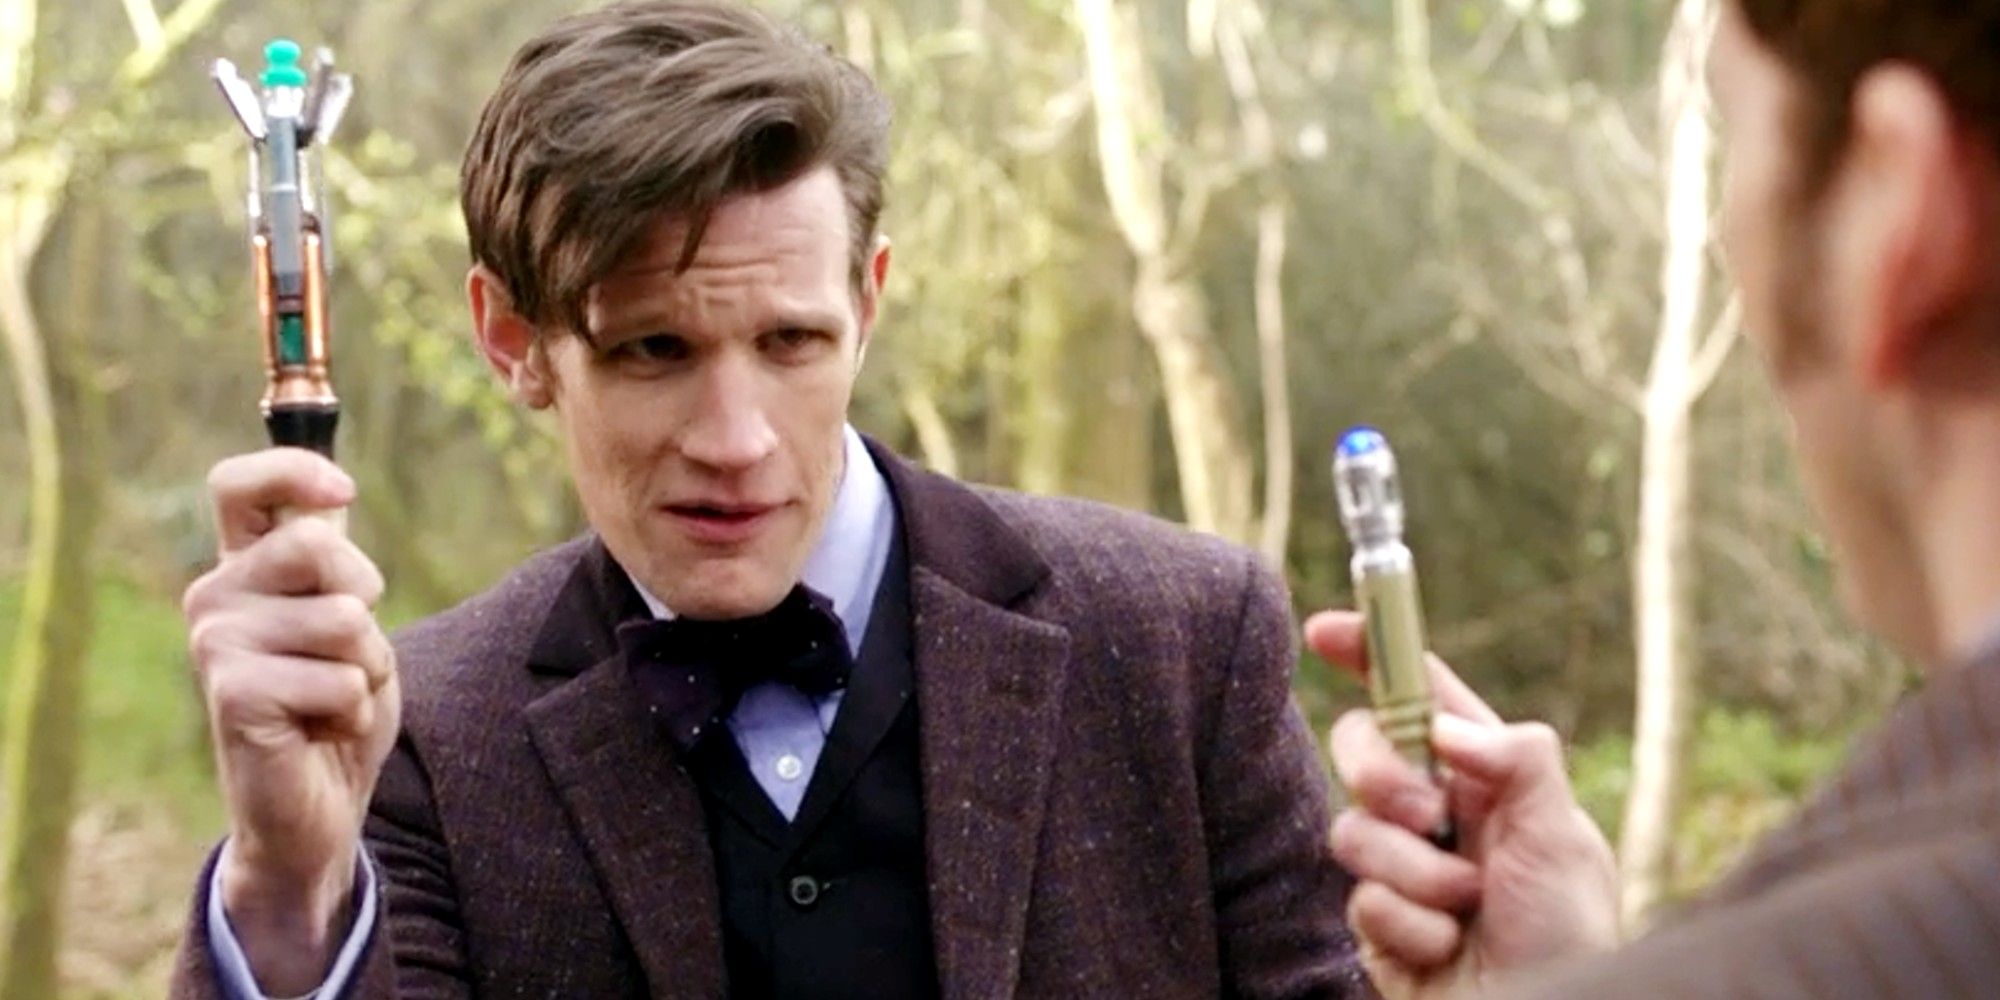 The Tenth and Eleventh Doctors compare sonic screwdrivers in The Day of the Doctor